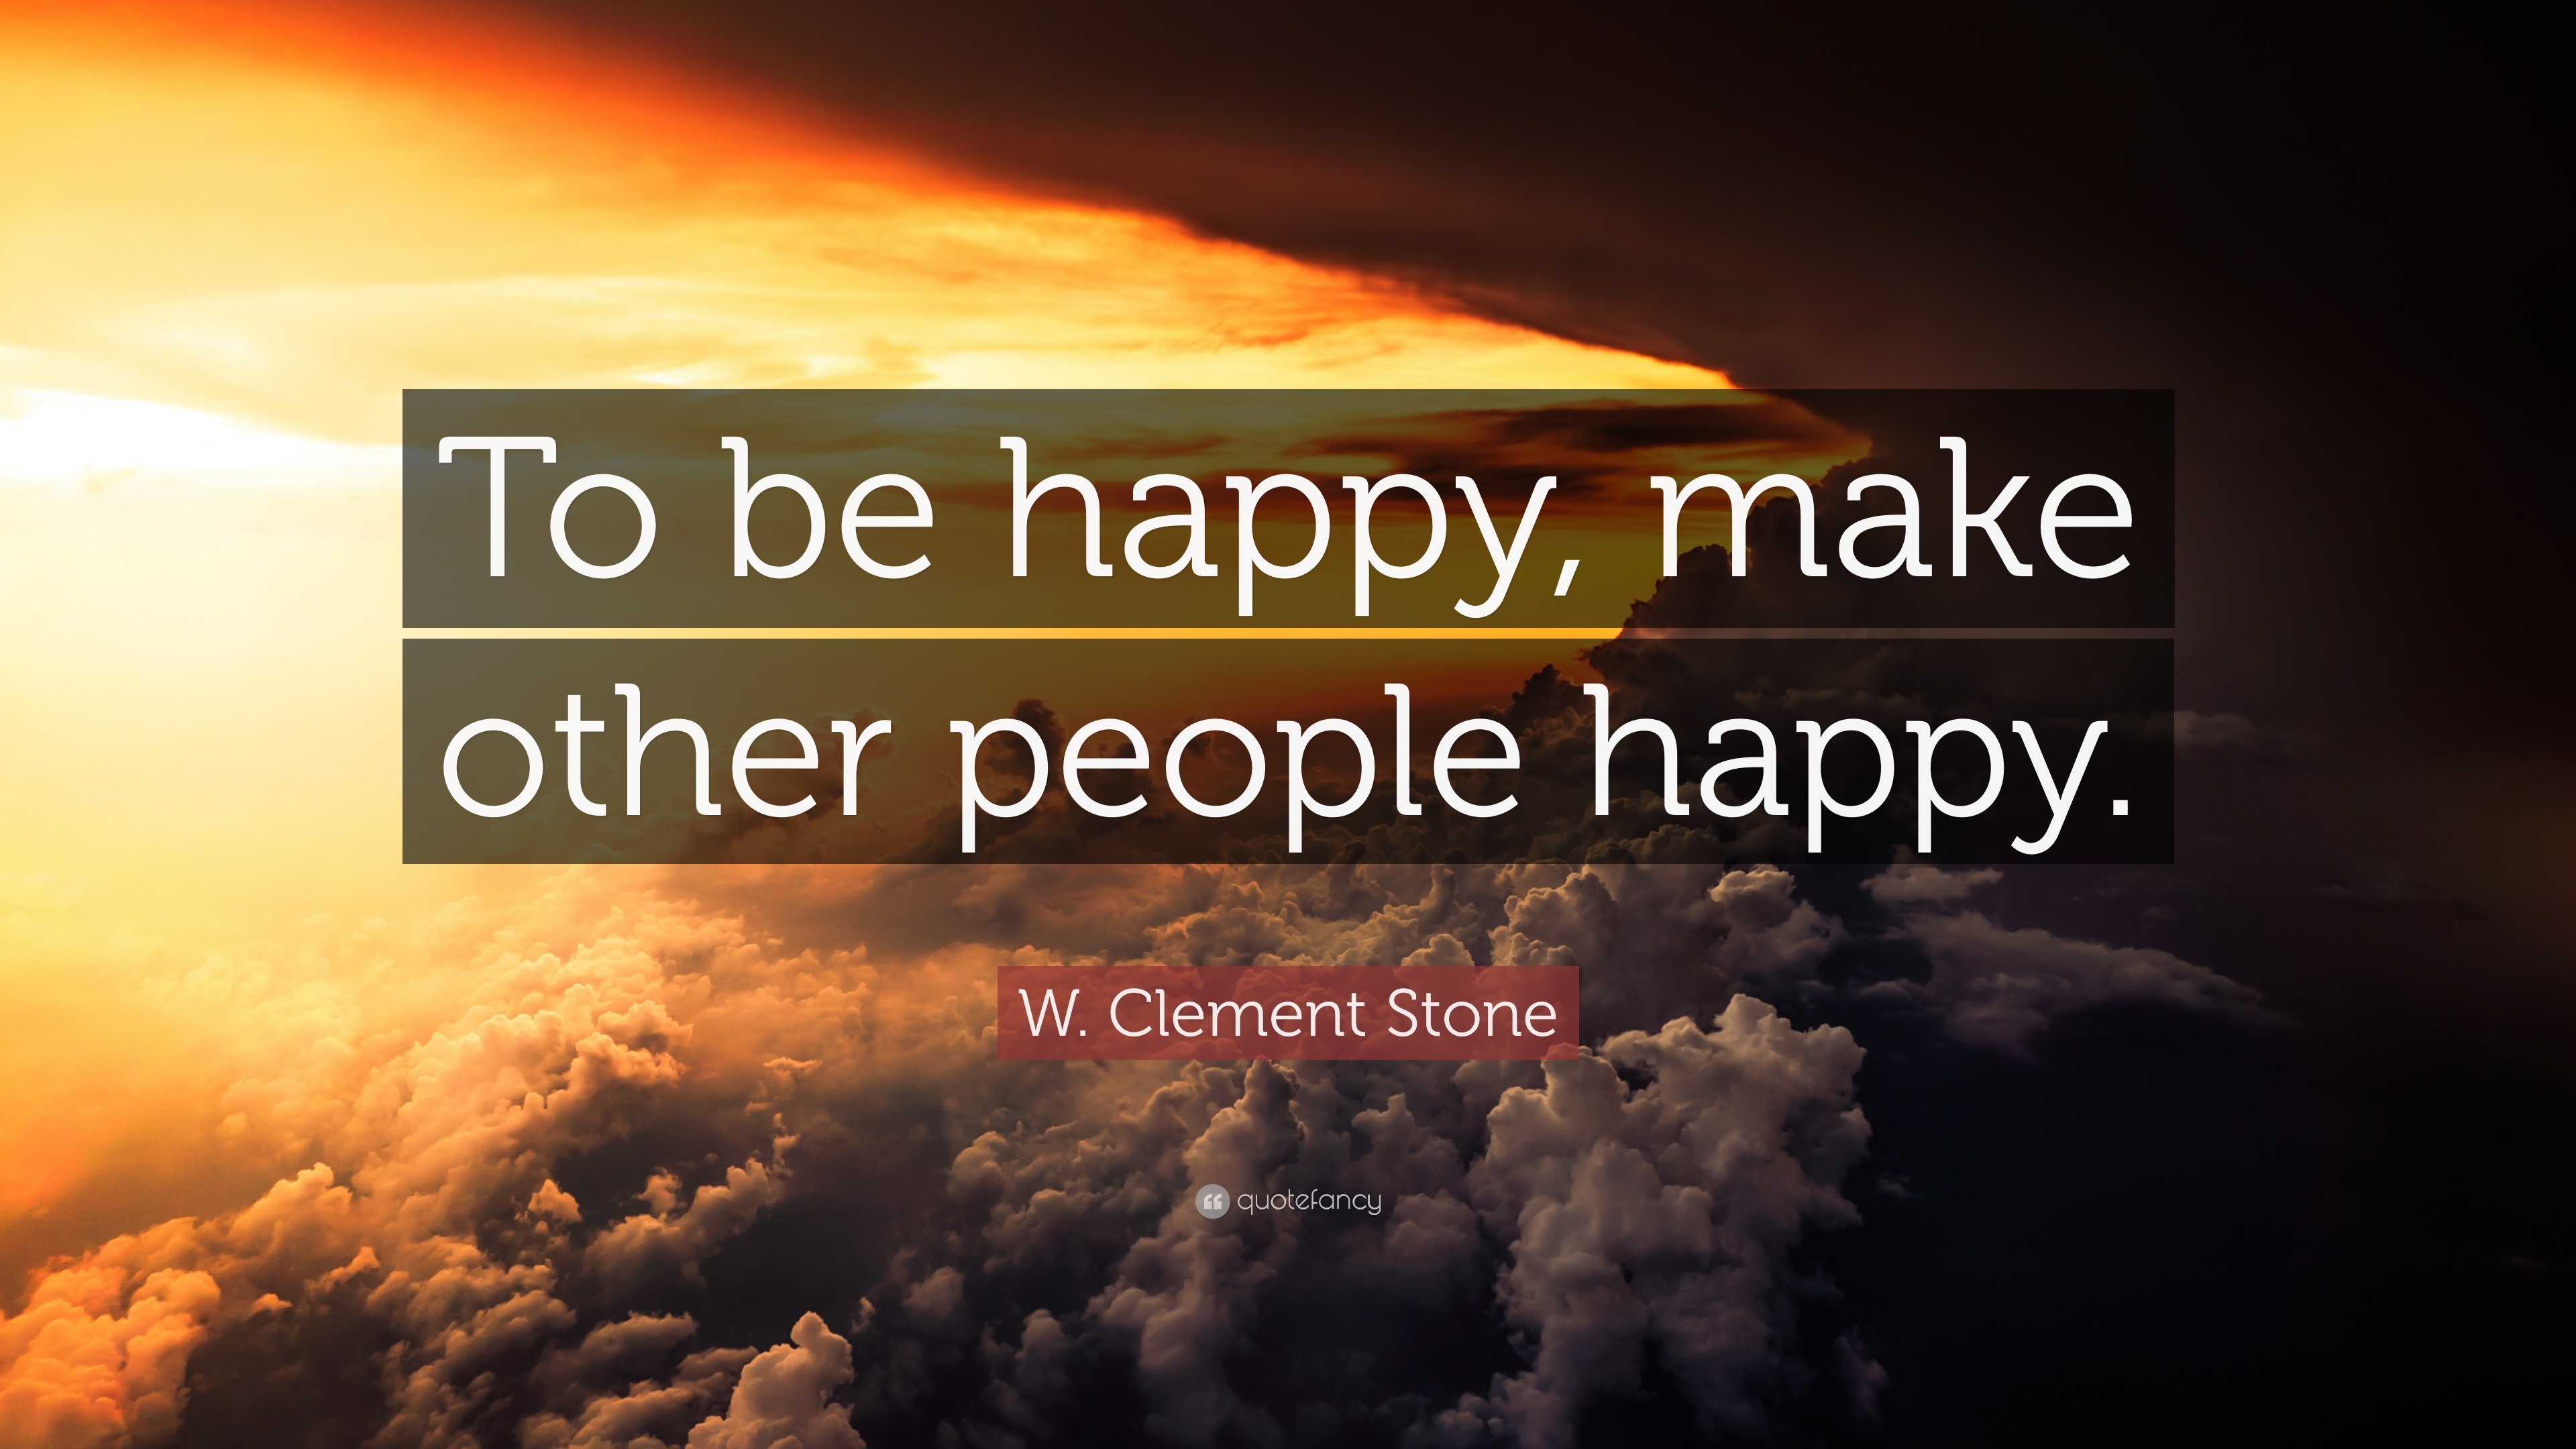 W Clement Stone Quote “to Be Happy Make Other People Happy”